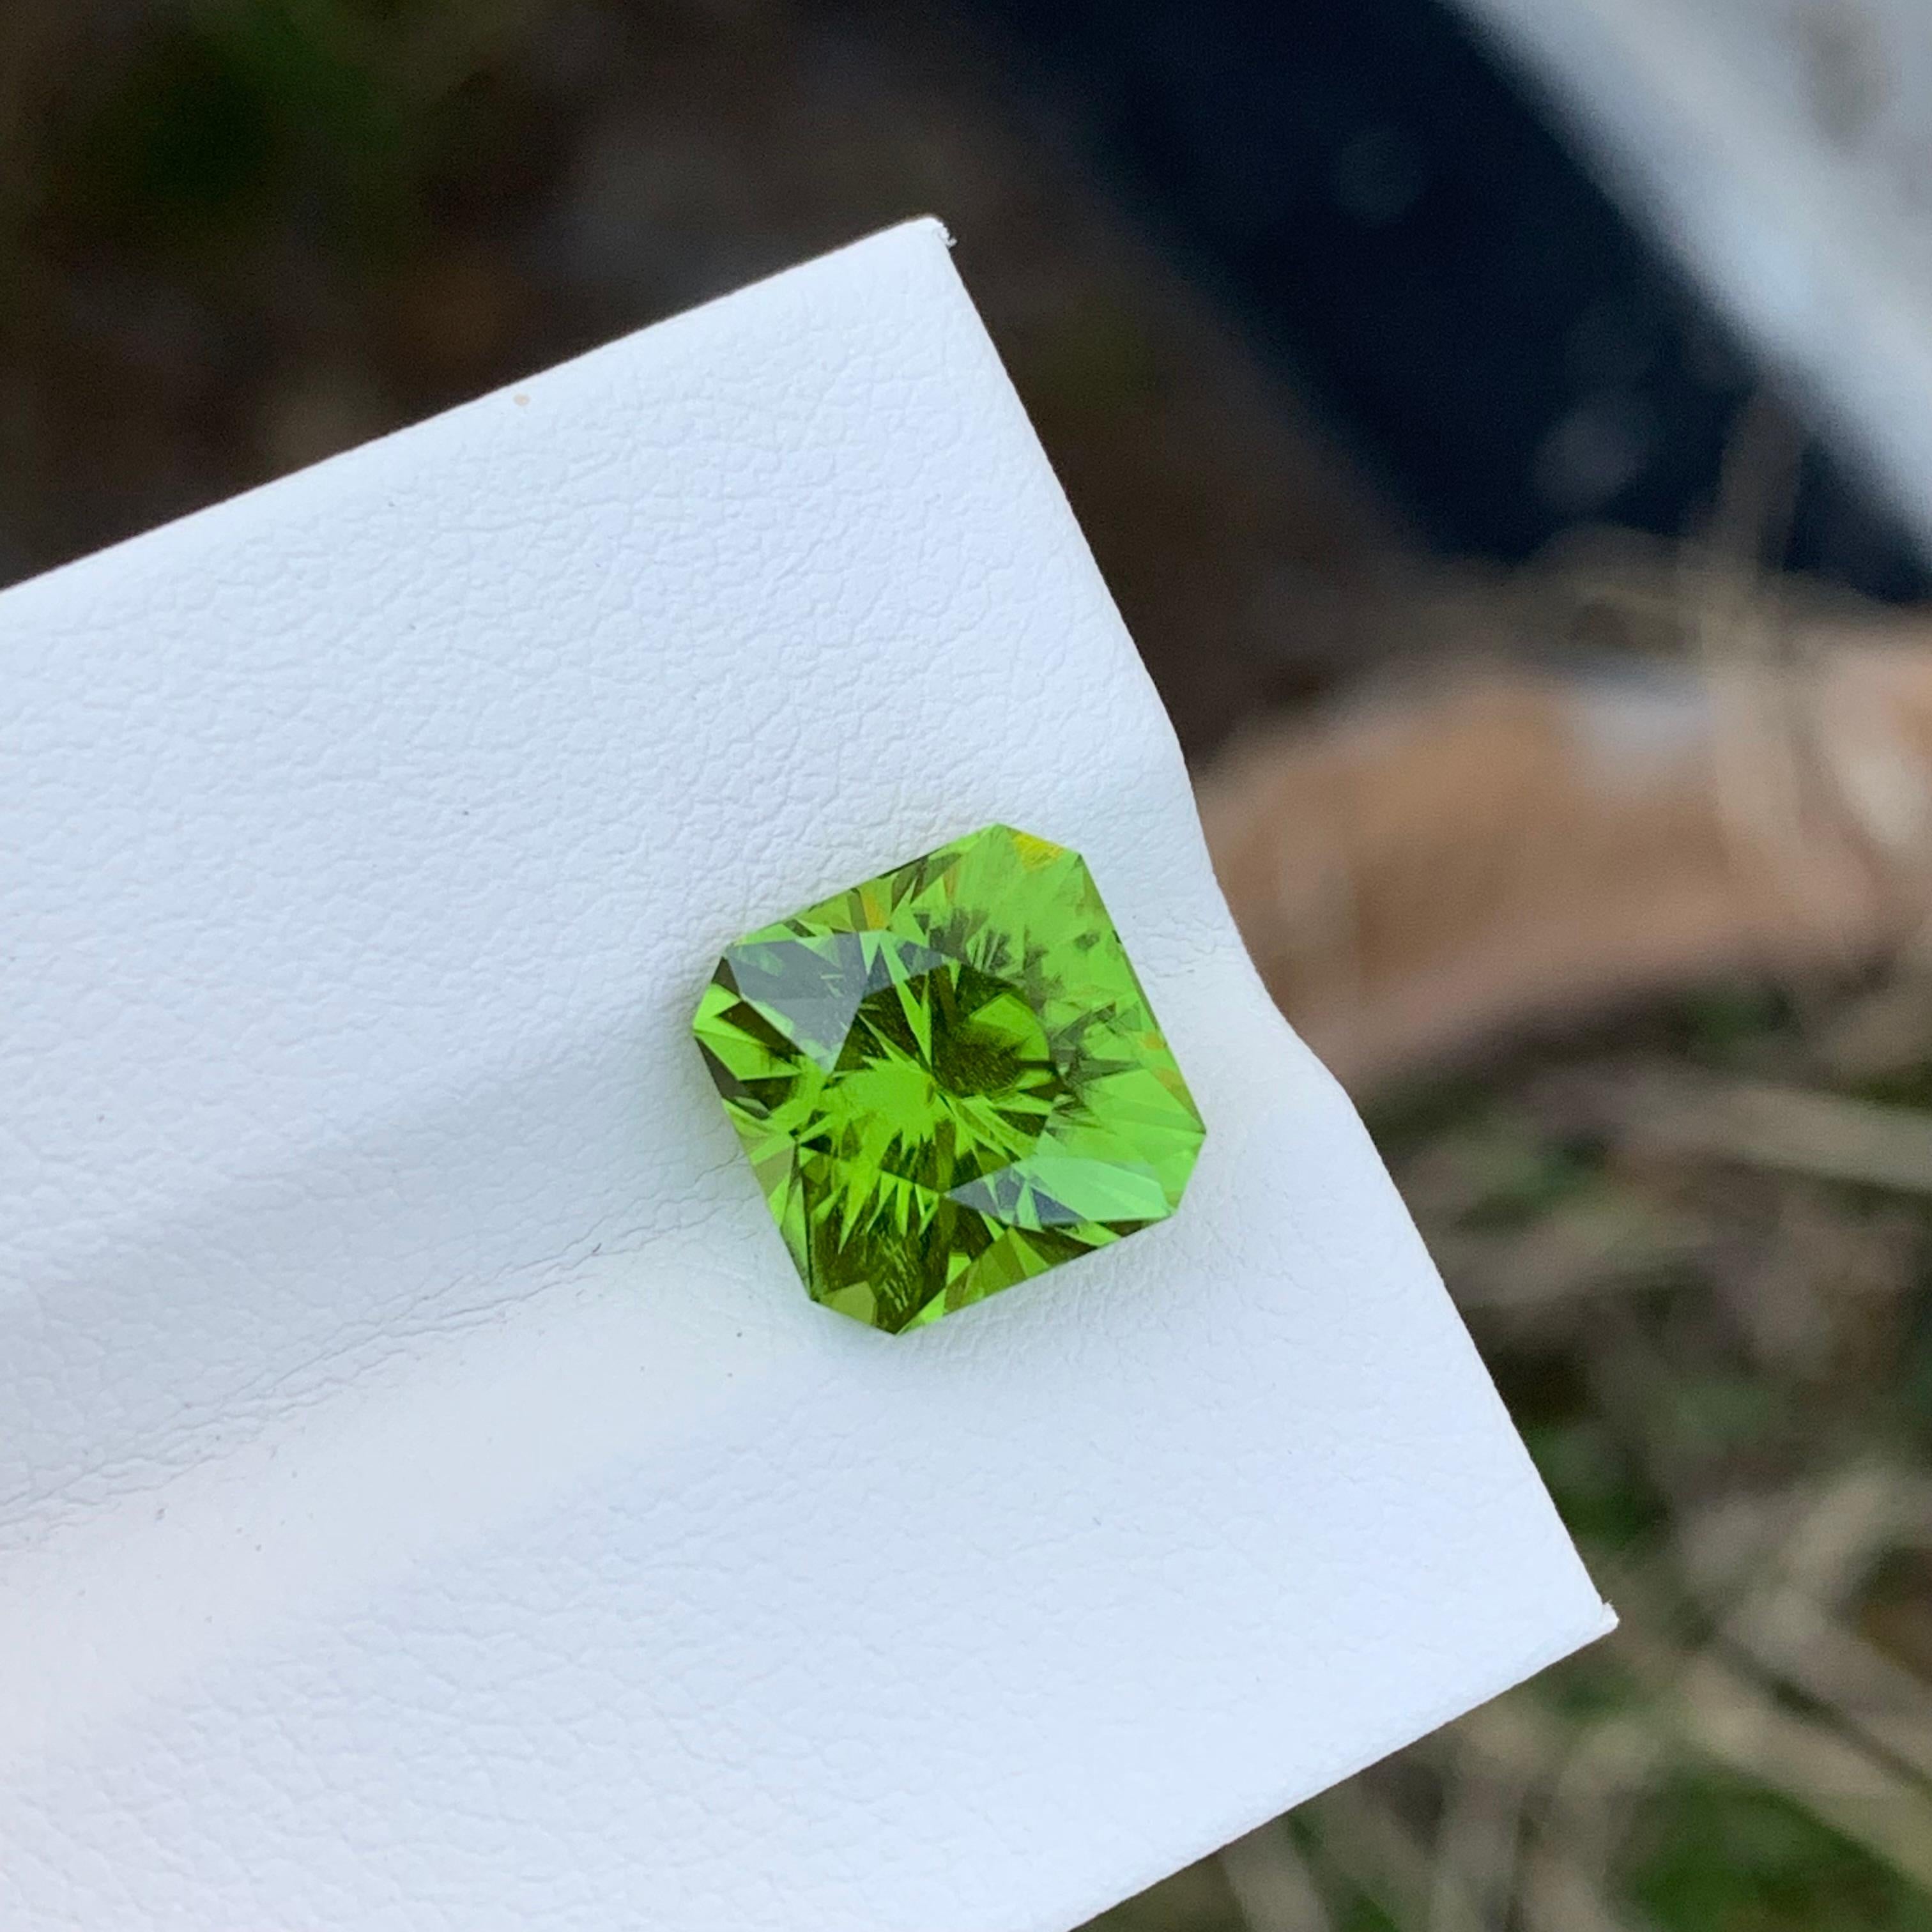 Loose Peridot
Weight: 4.20 Carats
Dimension: 8.8 x 8.8 x 6.7 Mm
Colour: Green
Origin: Supat Valley, Pakistan
Shape: Cushion
Certificate: On Demand
Treatment: Non

Peridot, a vibrant and lustrous gemstone, has been cherished for centuries for its